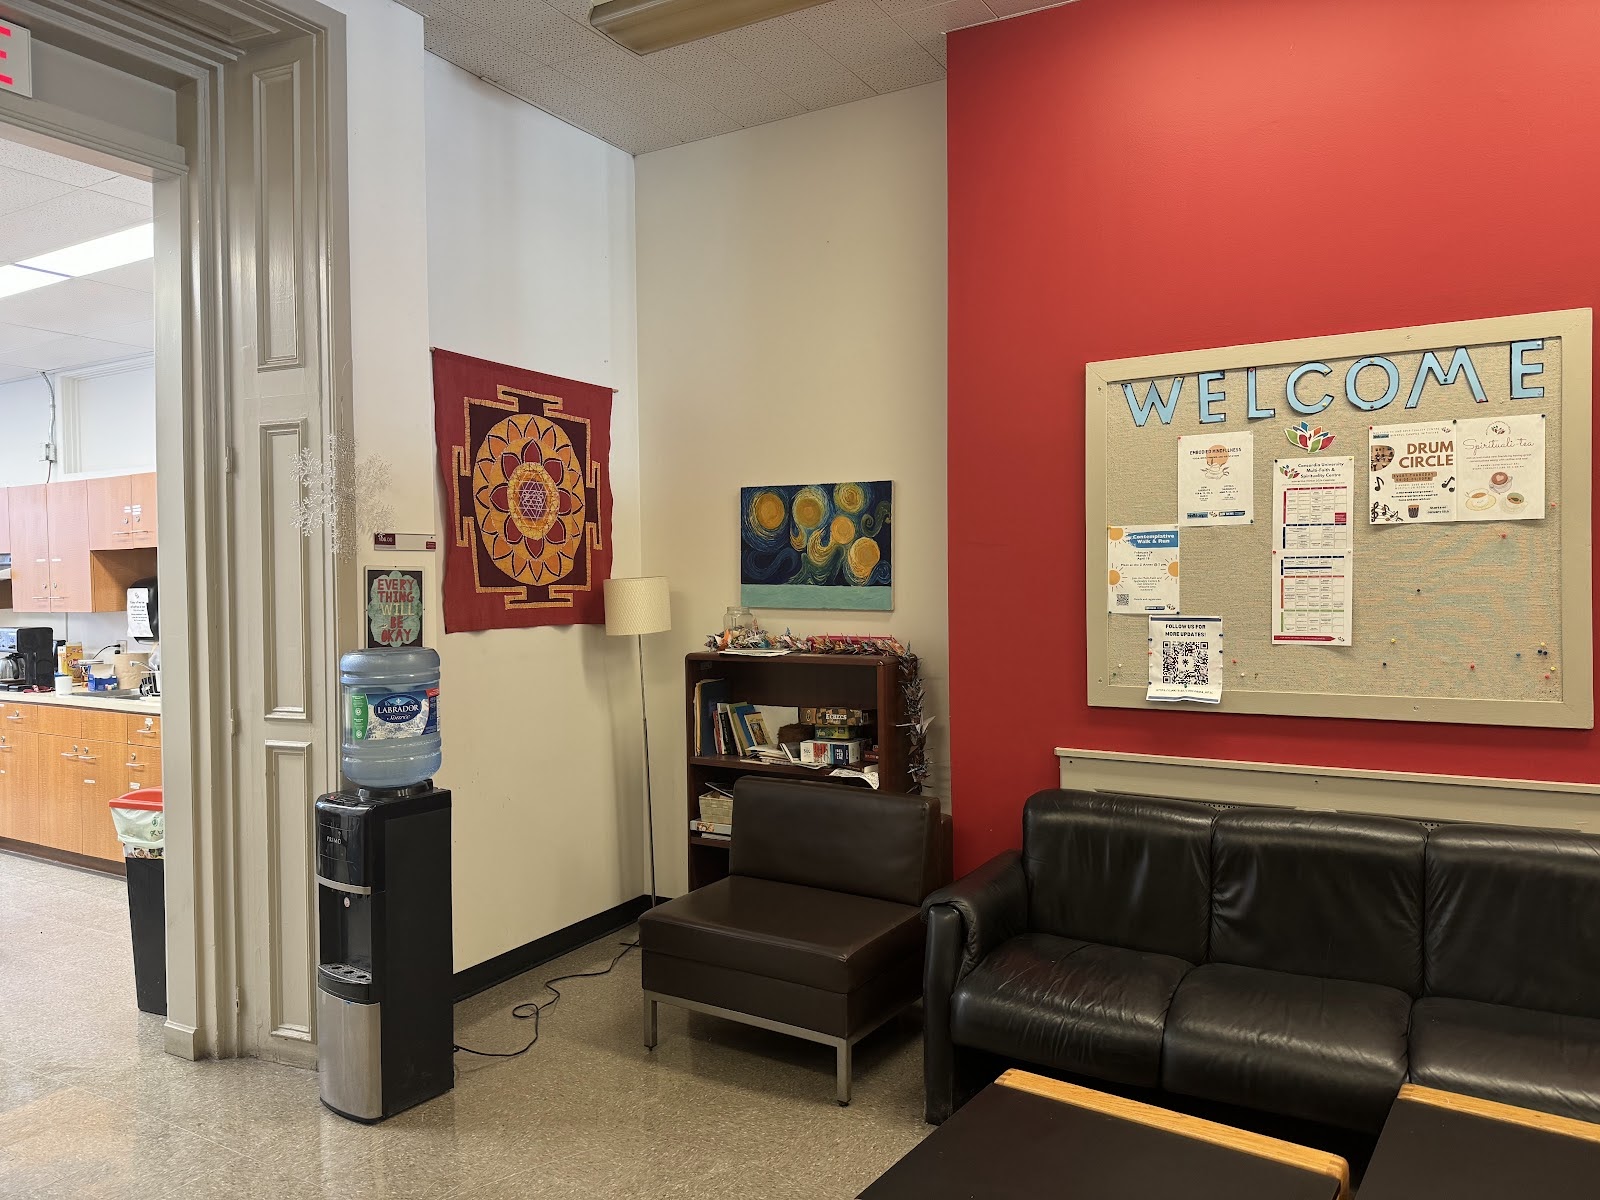 A room in the Multi-faith and Spirituality Centre office. There is a black leather couch, a bulletin board with some flyers and “Welcome” written in blue letters. There is a small bookcase, a water cooler and a bit of the kitchen is visible in the background.